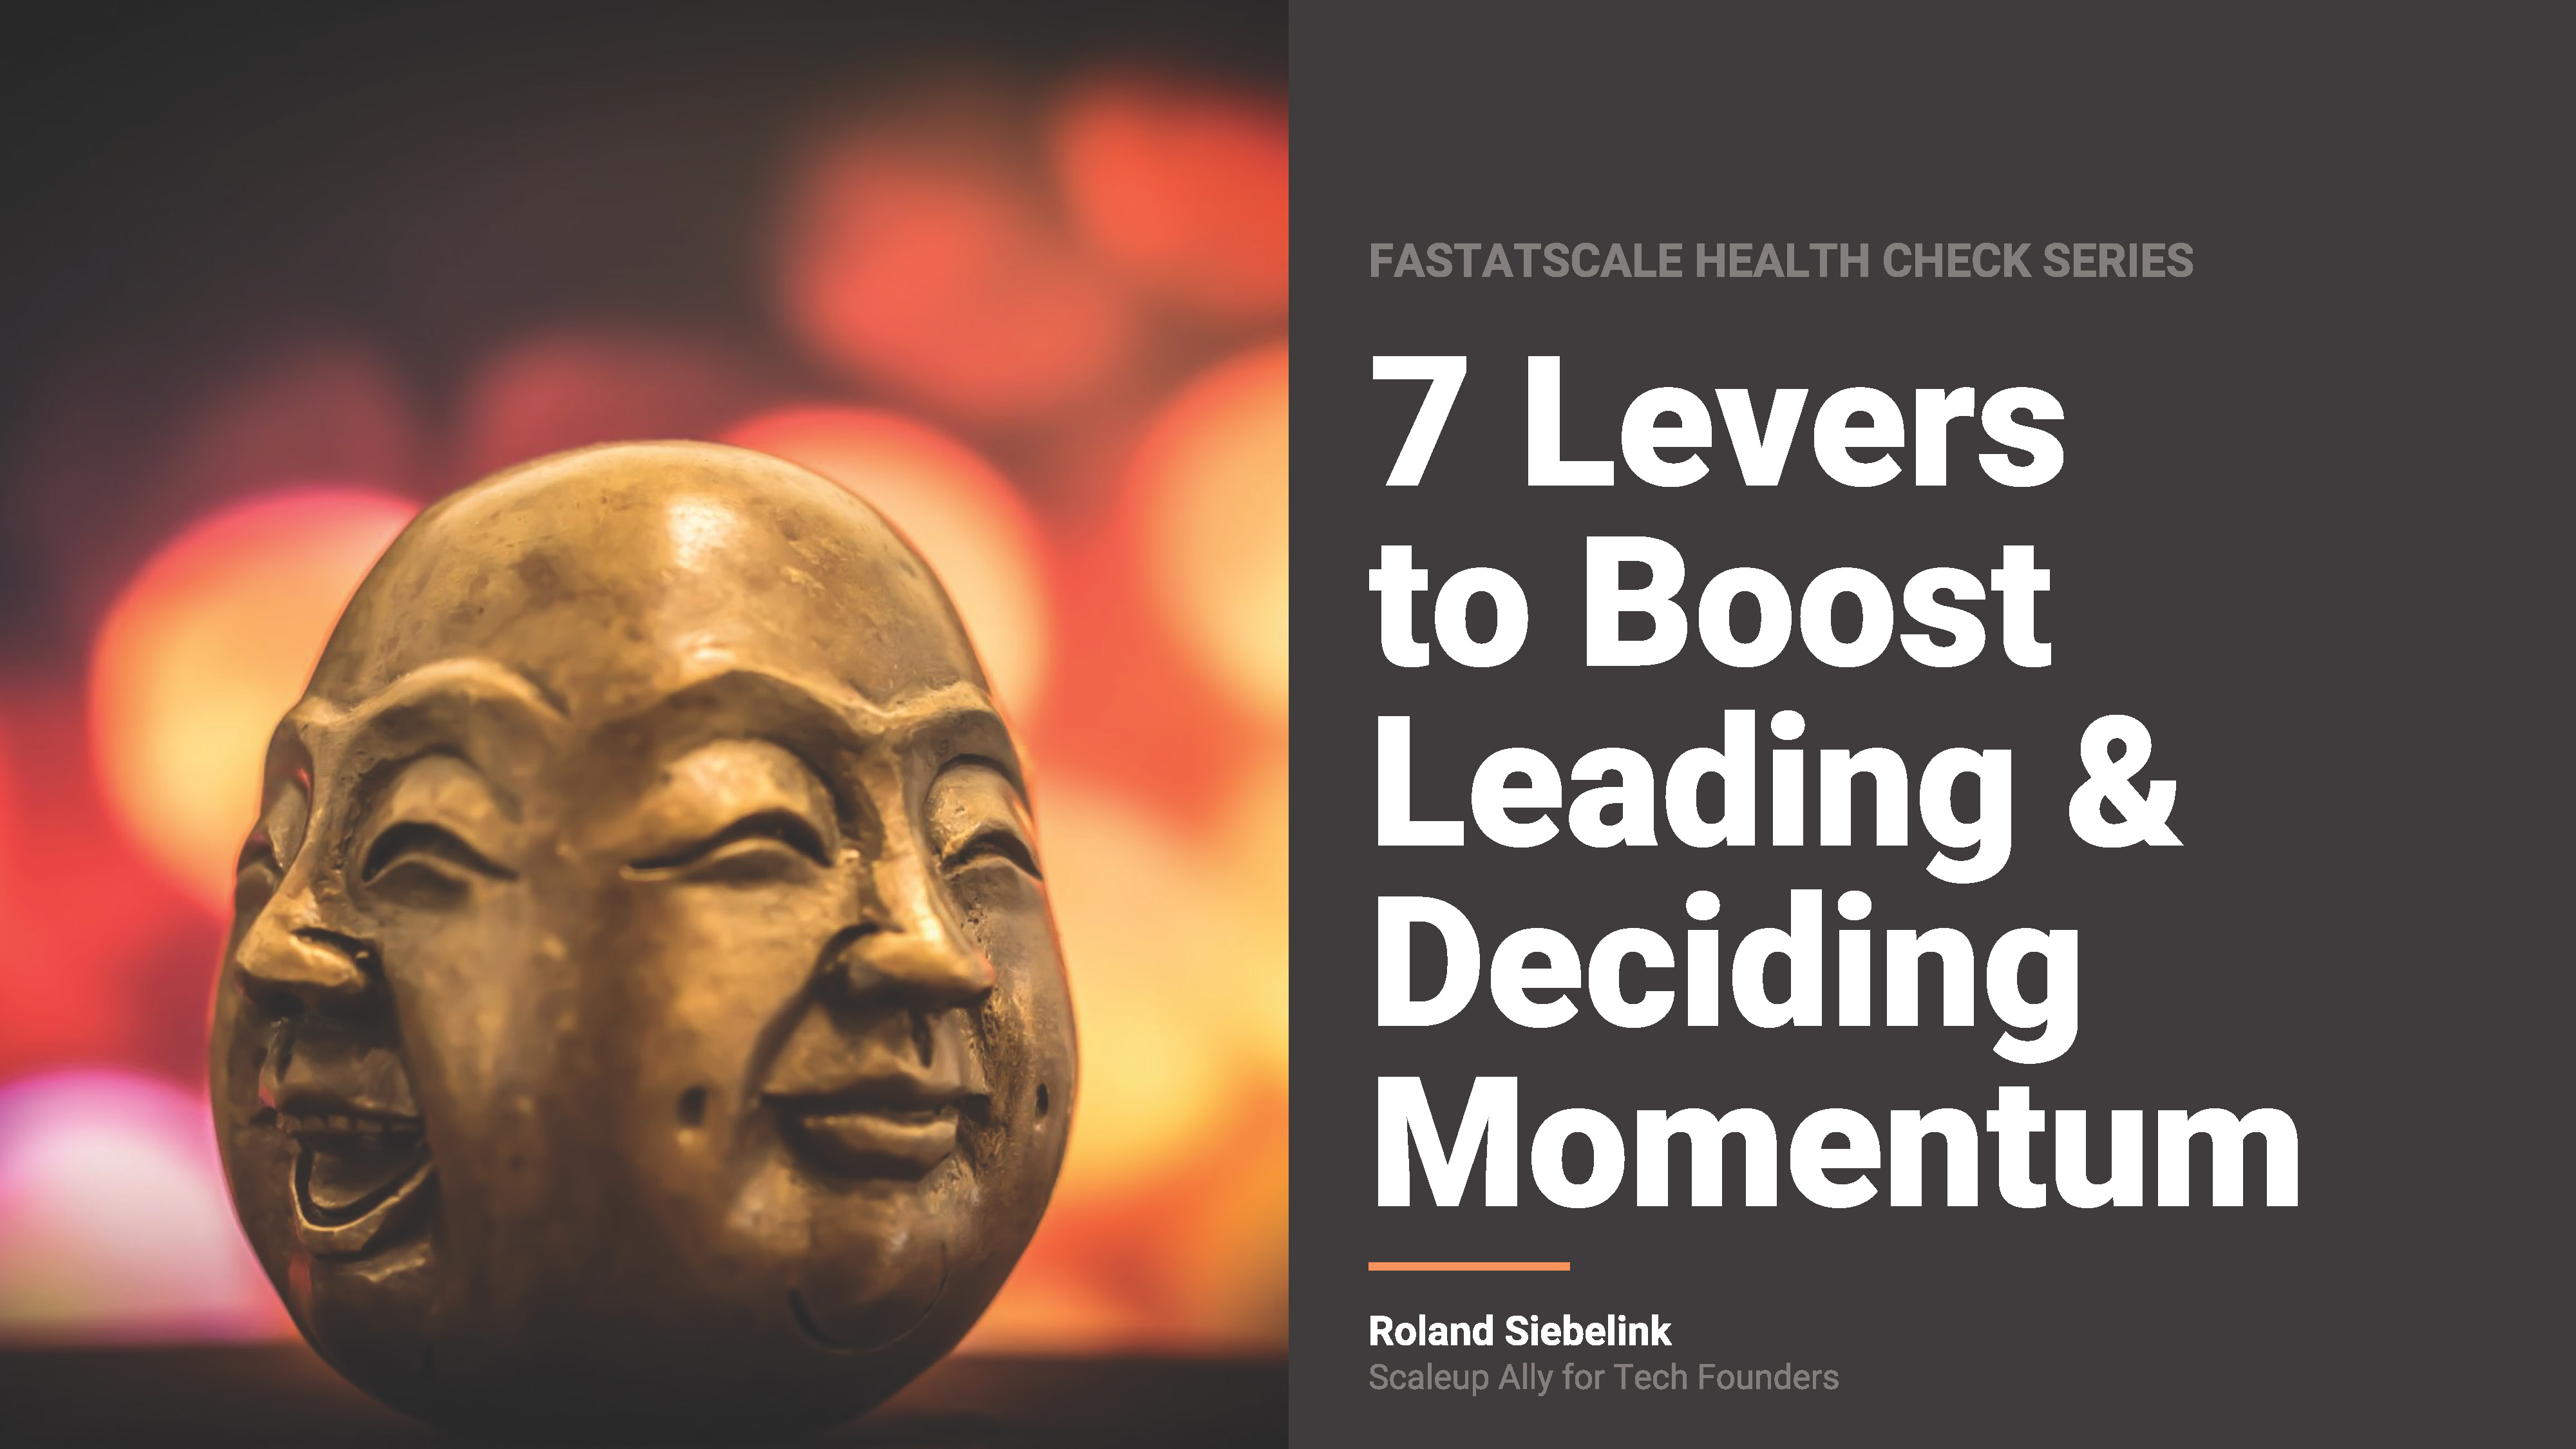 7 Levers to Boost Leading & Deciding Momentum 